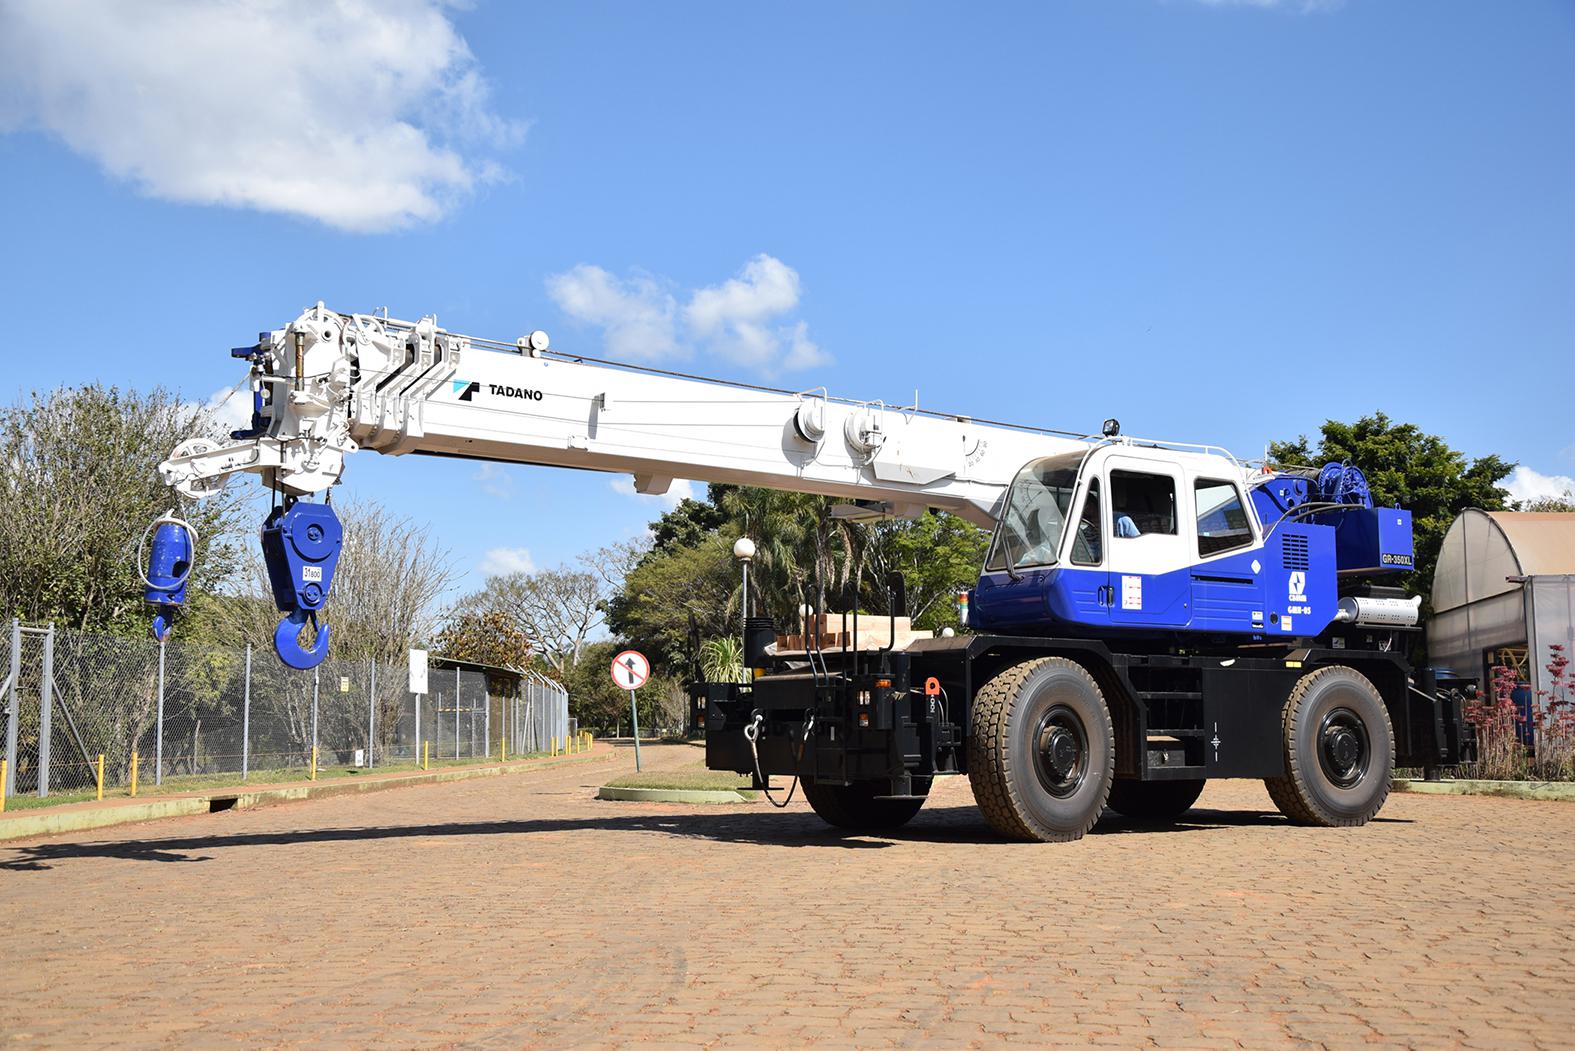 The Tadano GR-350XL, a new legacy crane for CBMM that was delivered in 2020.